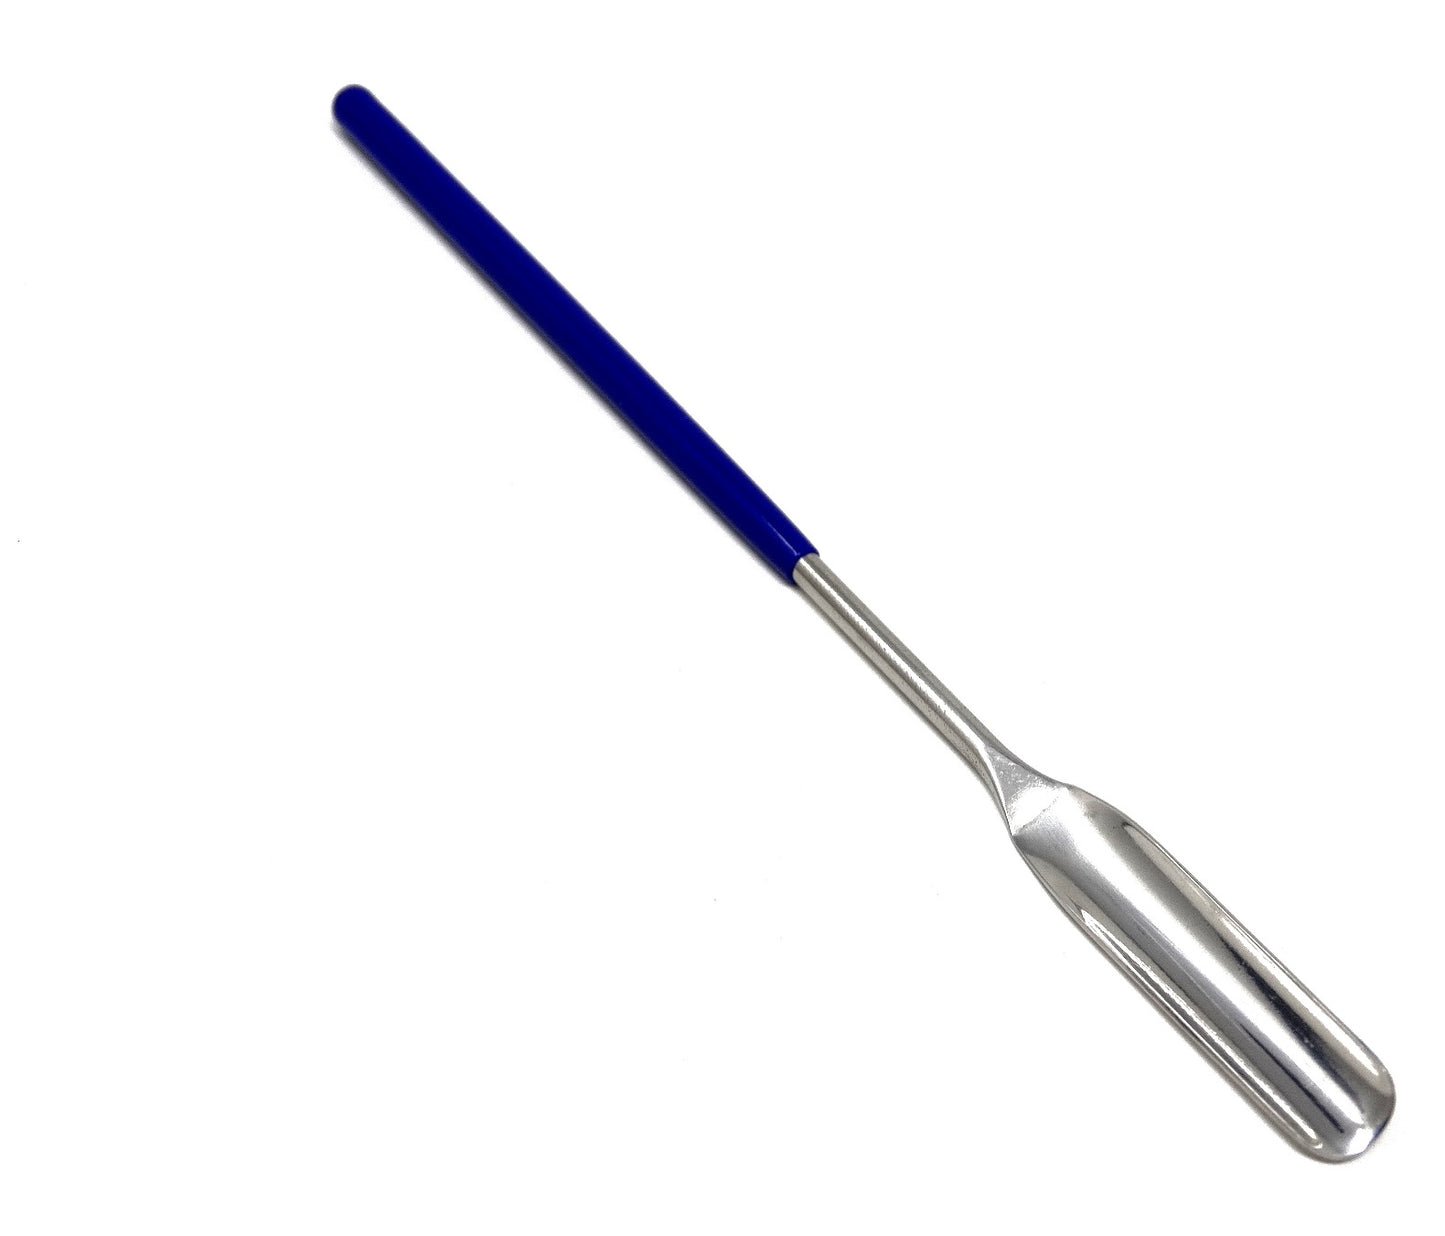 IMS-VL004 Stainless Steel Micro Lab Scoop Half Rounded Spoon Spatula Sampler, with Vinyl Handle 6"